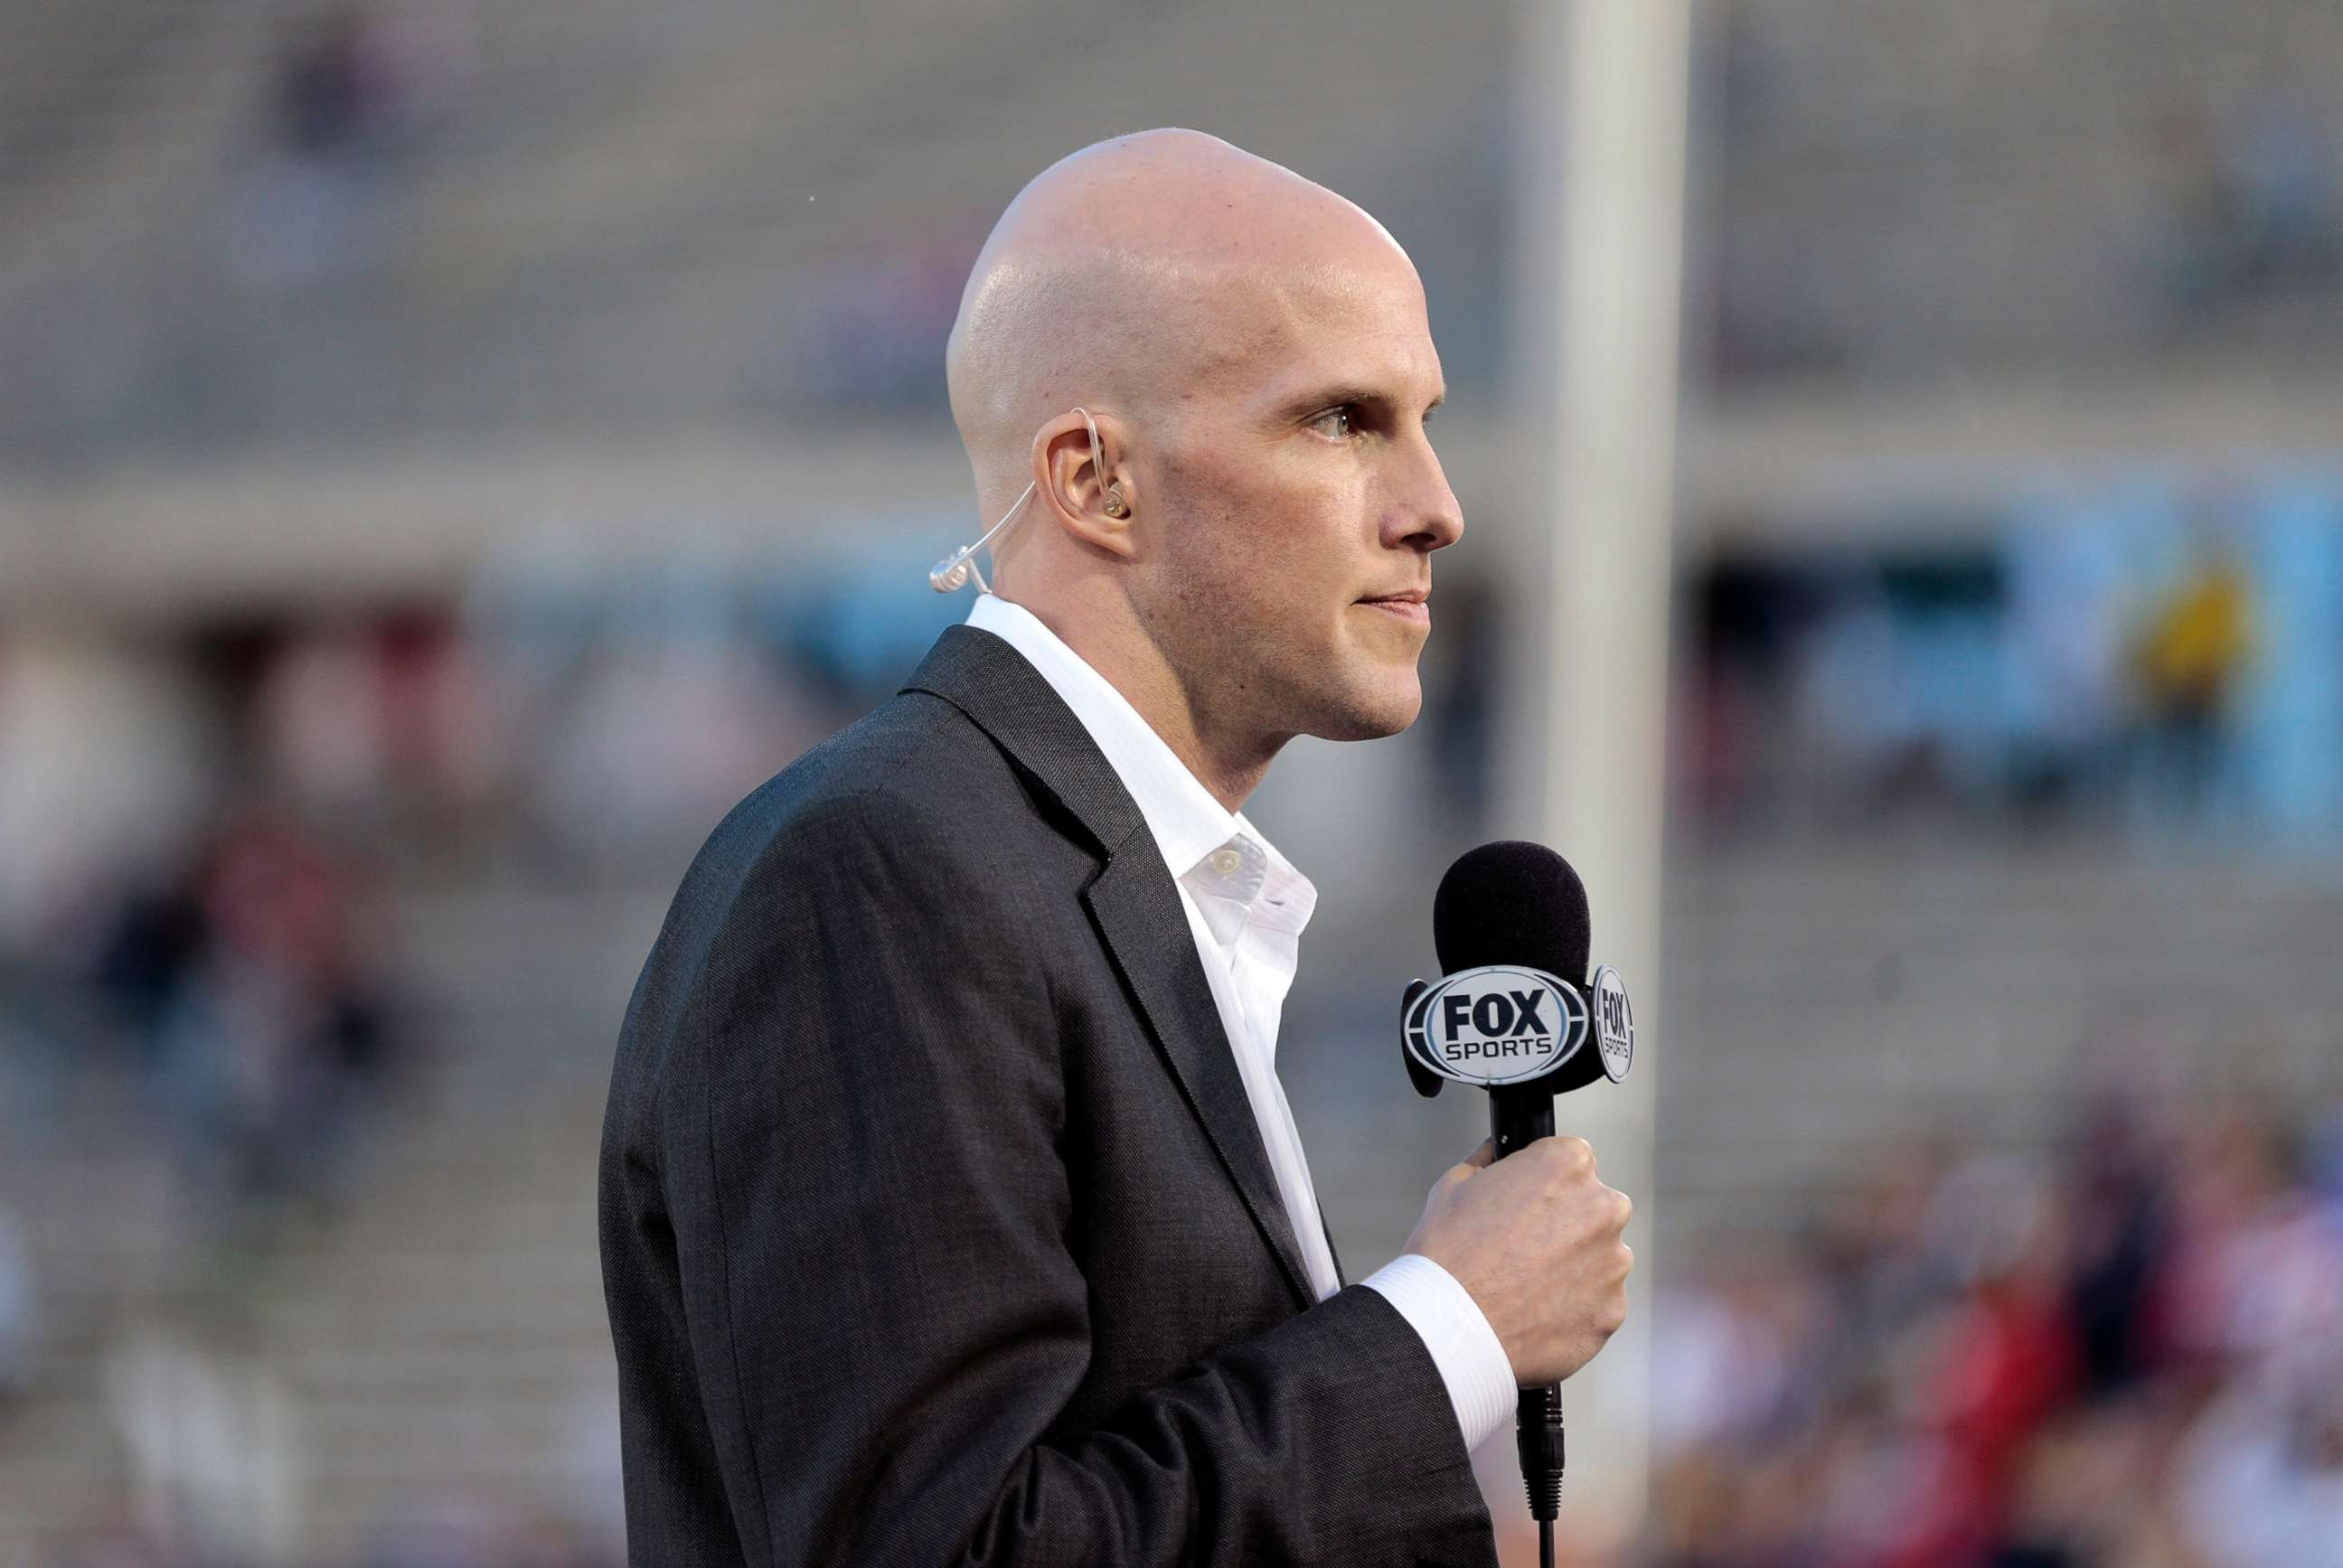 PHOTO: Sports reporter Grant Wahl covering the U.S. Men's National team in East Hartford, Conn., Oct. 10, 2014.